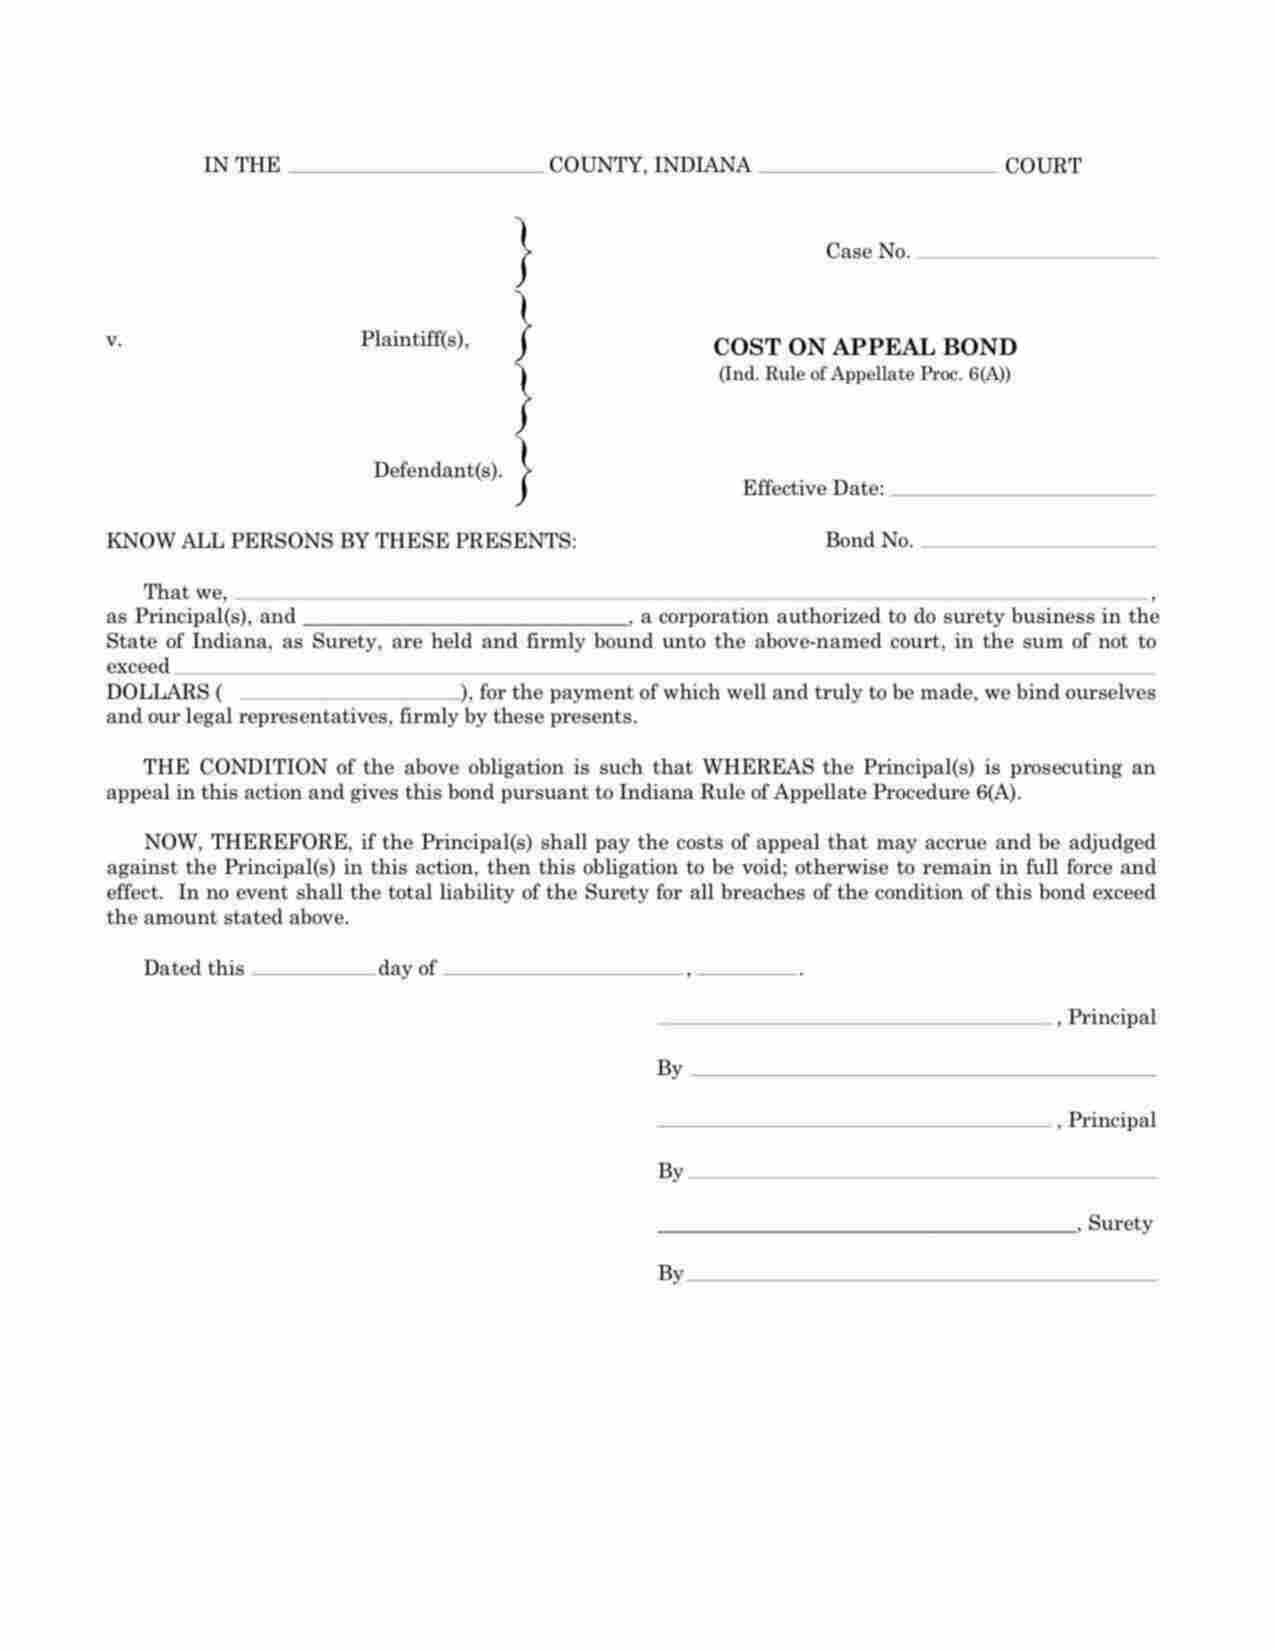 Indiana Cost on Appeal Bond Form